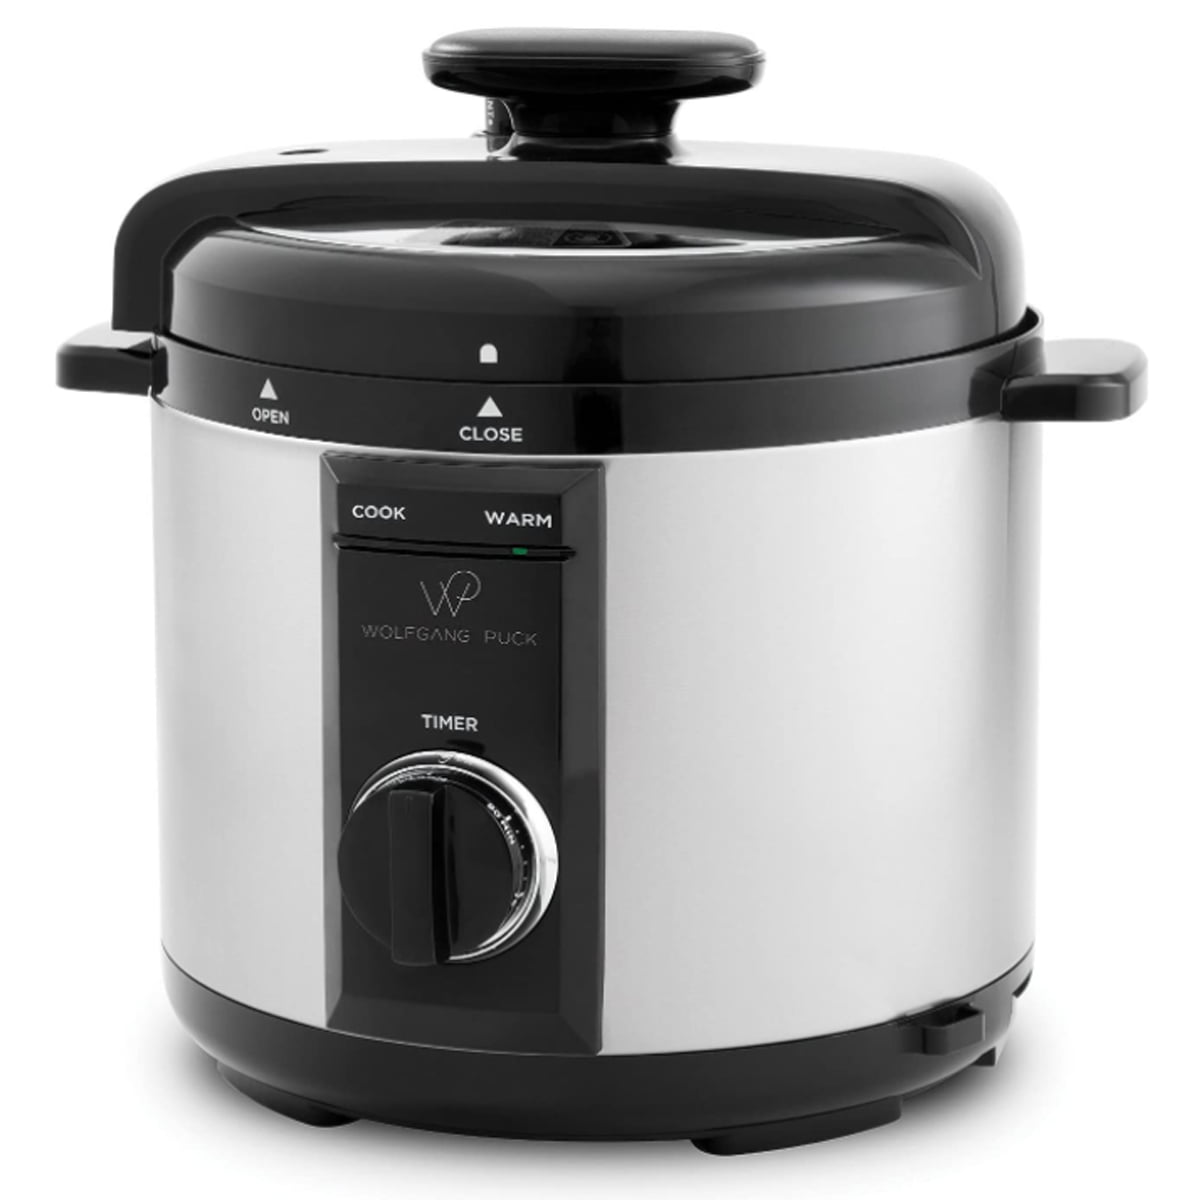 Wolfgang Puck Pressure Cookers